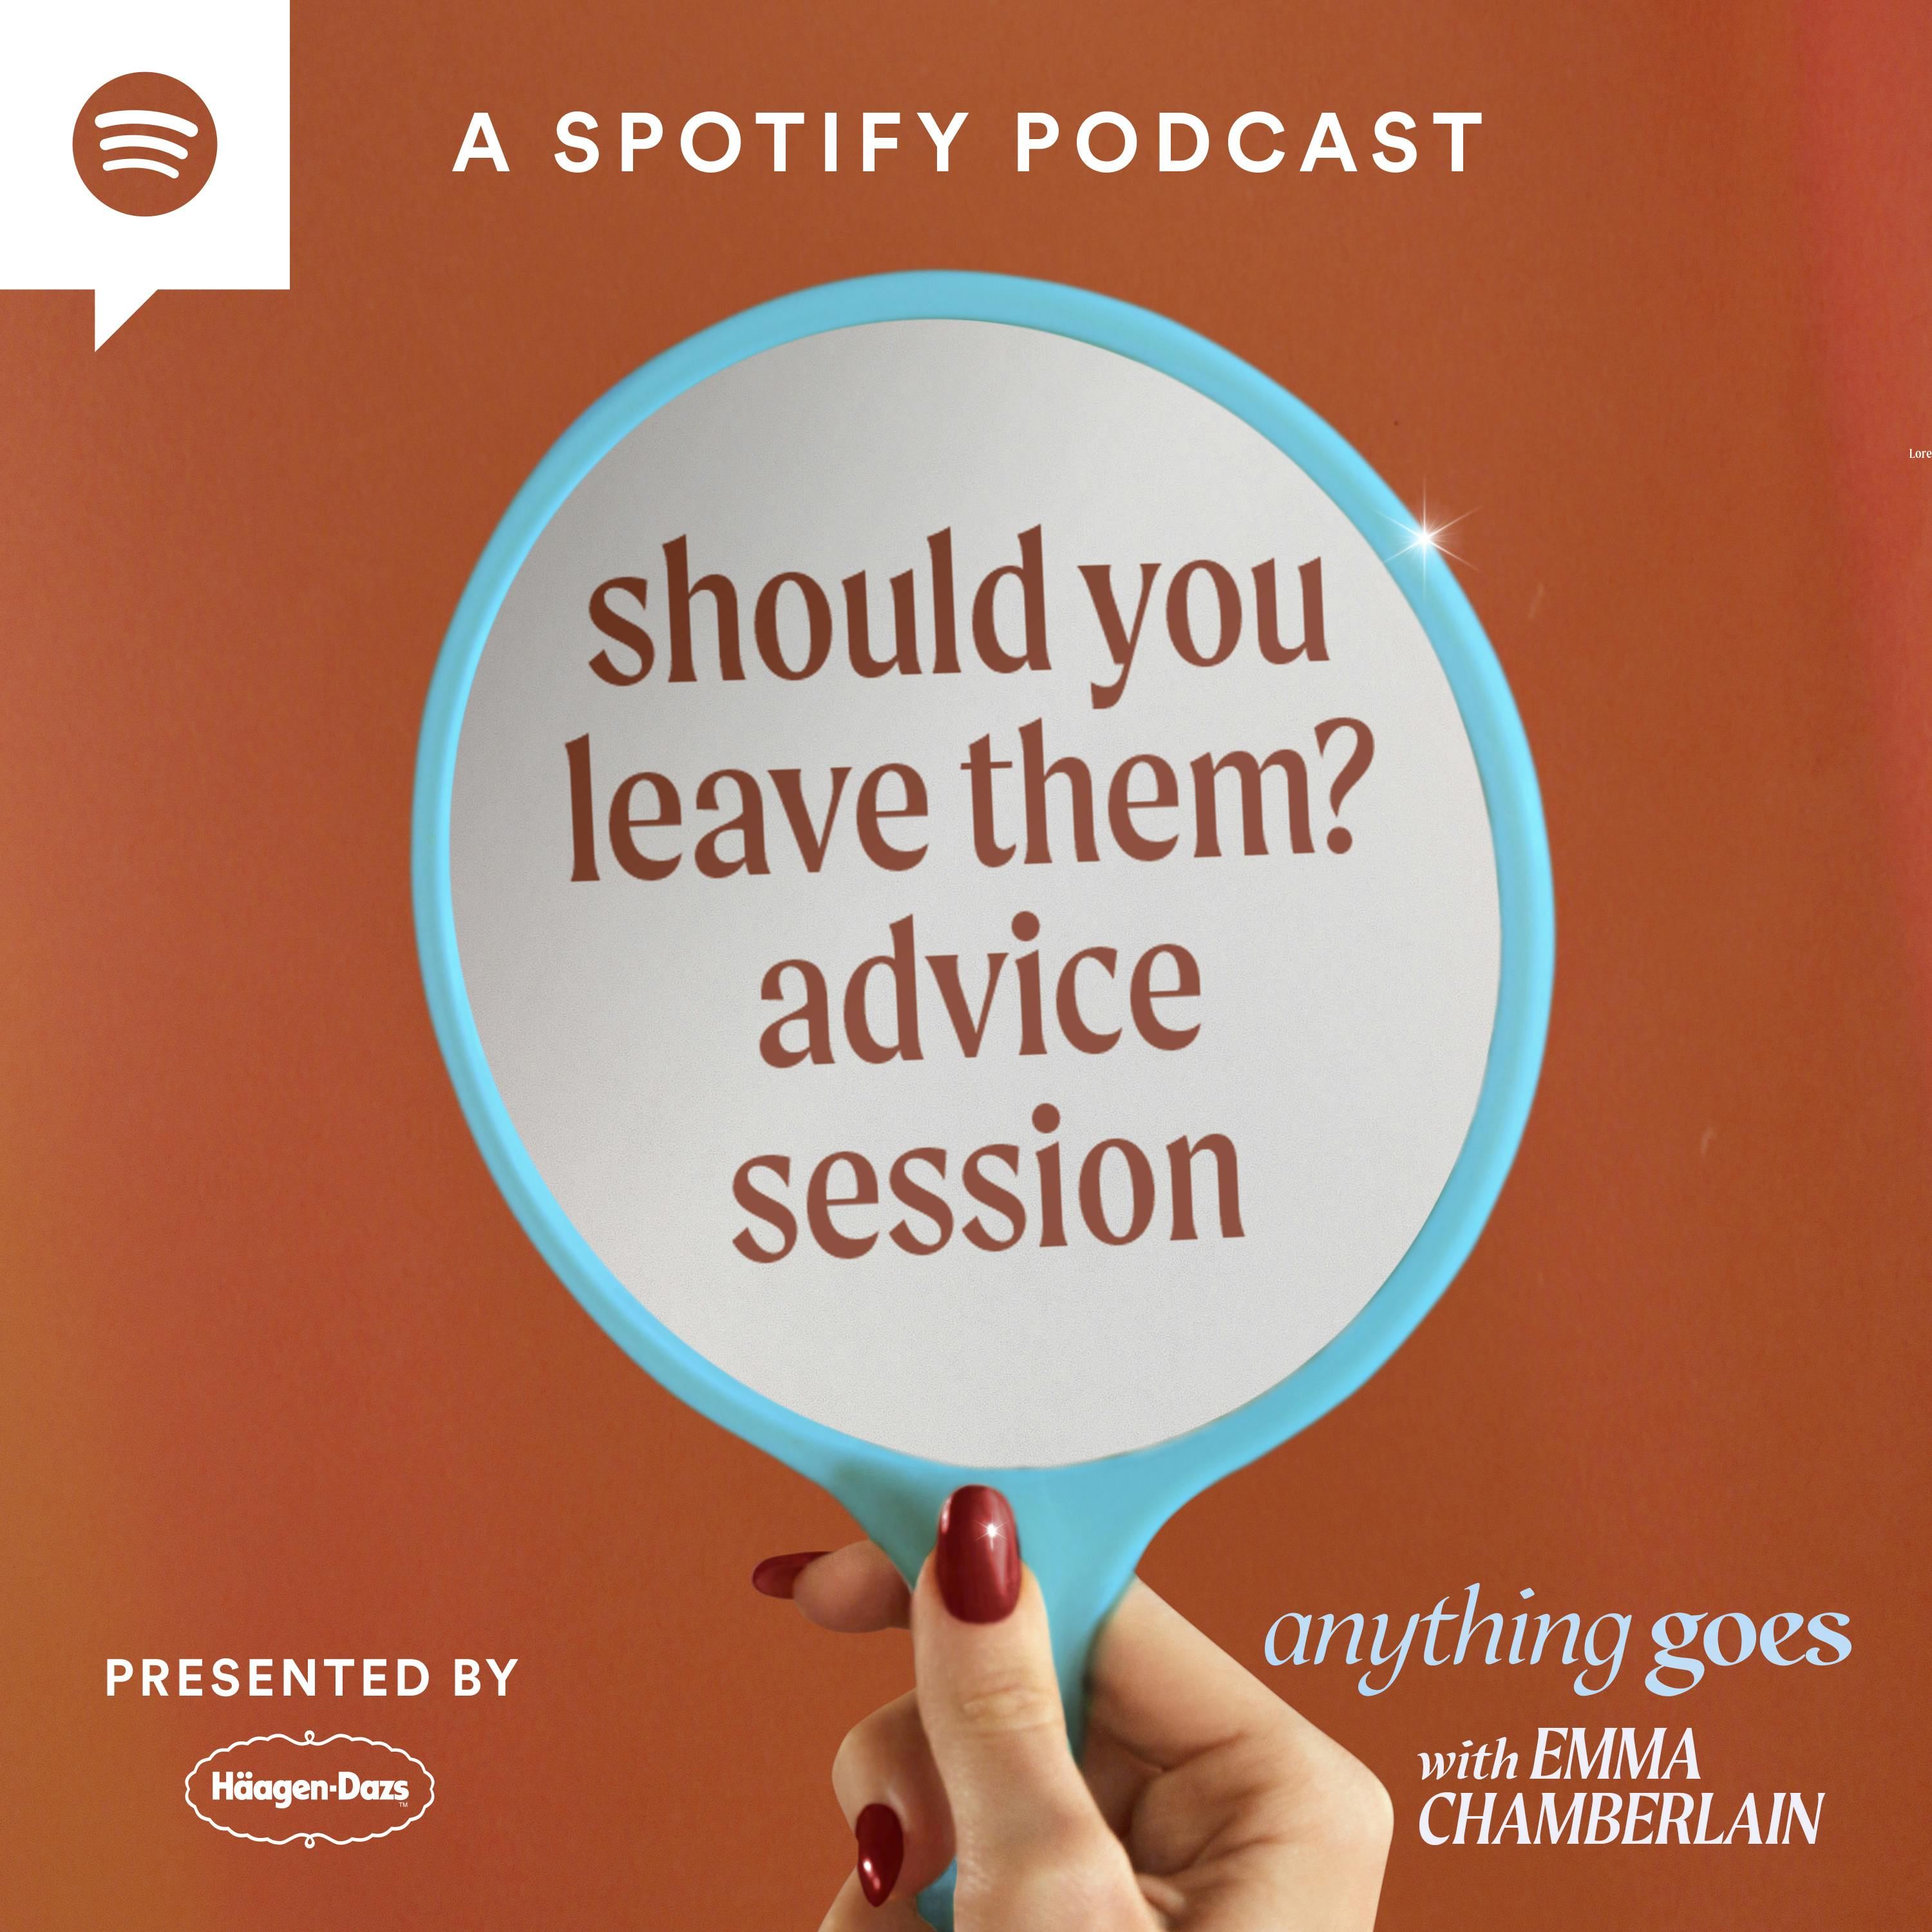 should you leave them? advice session